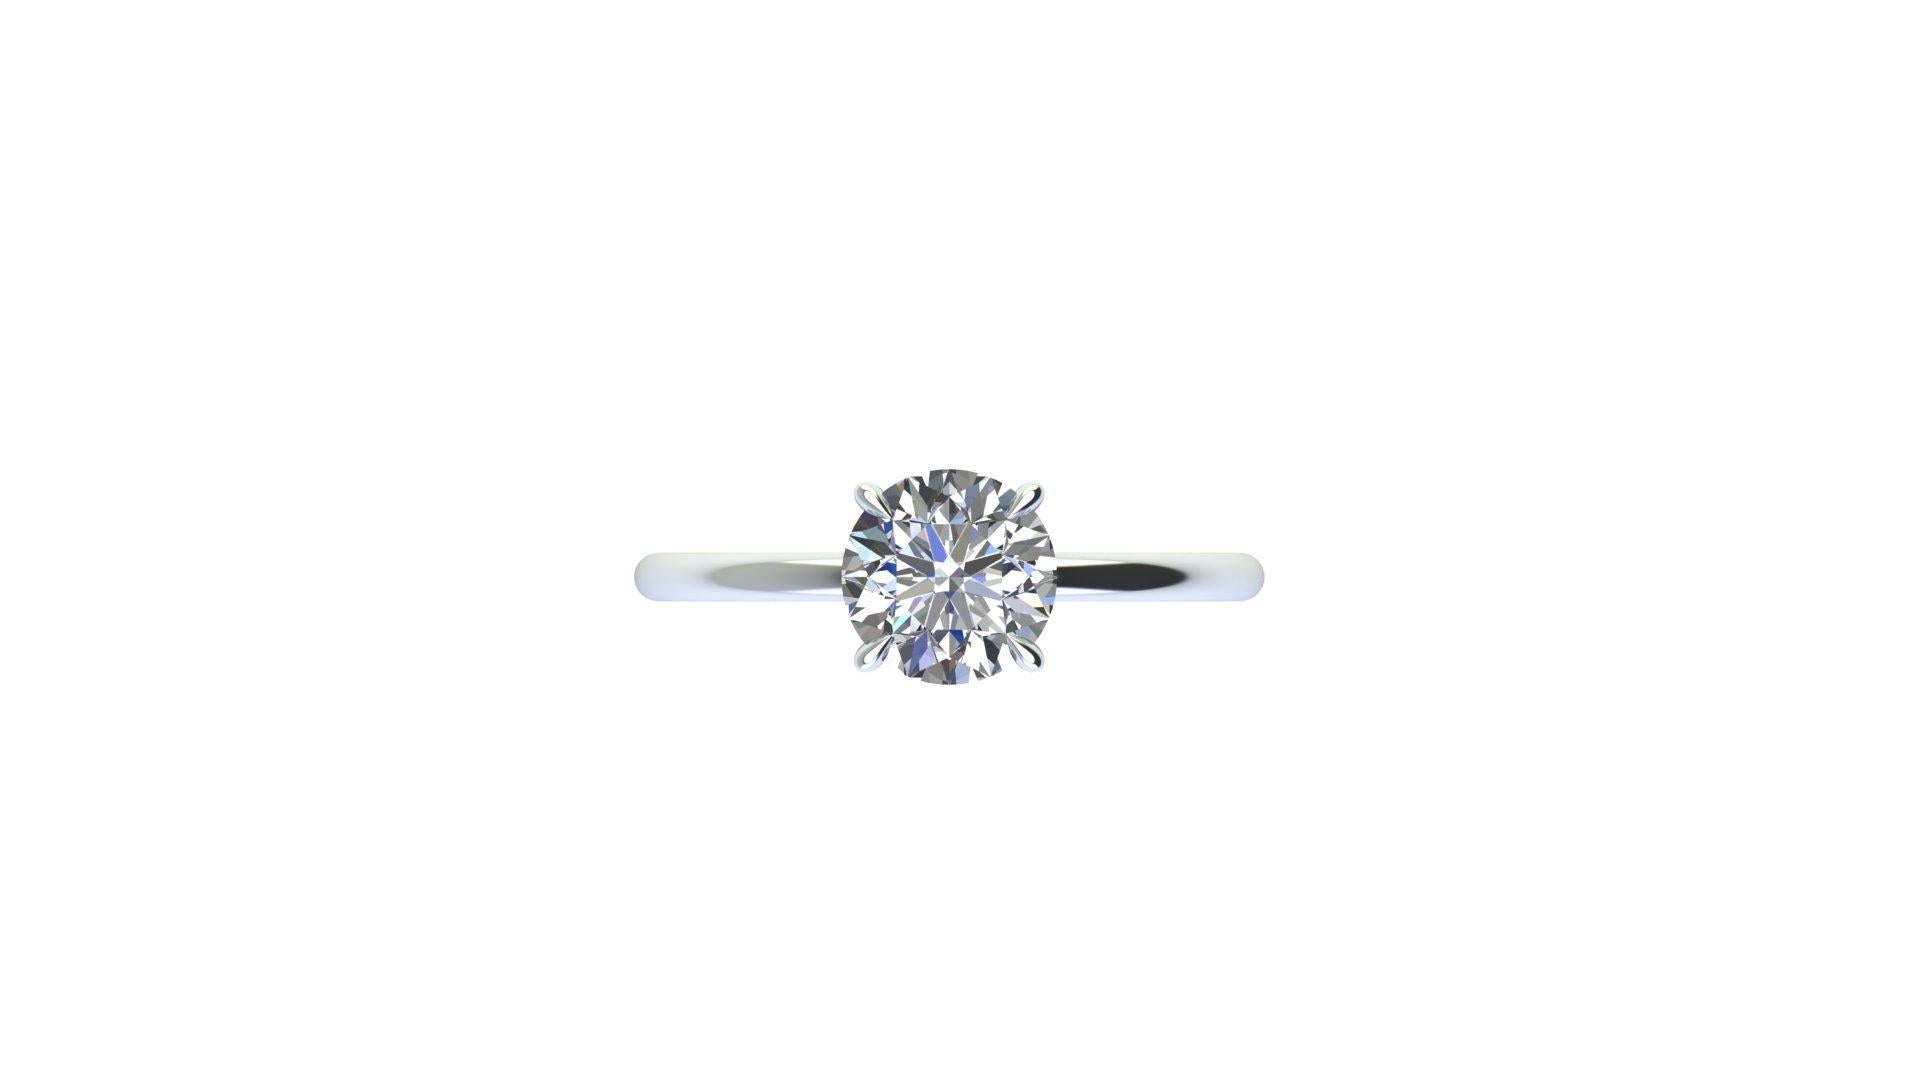 GIA Certified 1.01 Round diamond, G color, VS2 clarity with Triple Excellent Specs, in a high demand minimalistic, thin, low setting, four claw prongs, rounded wire shank.

This ring is a standard size 6 and Complimentary finger size change upon